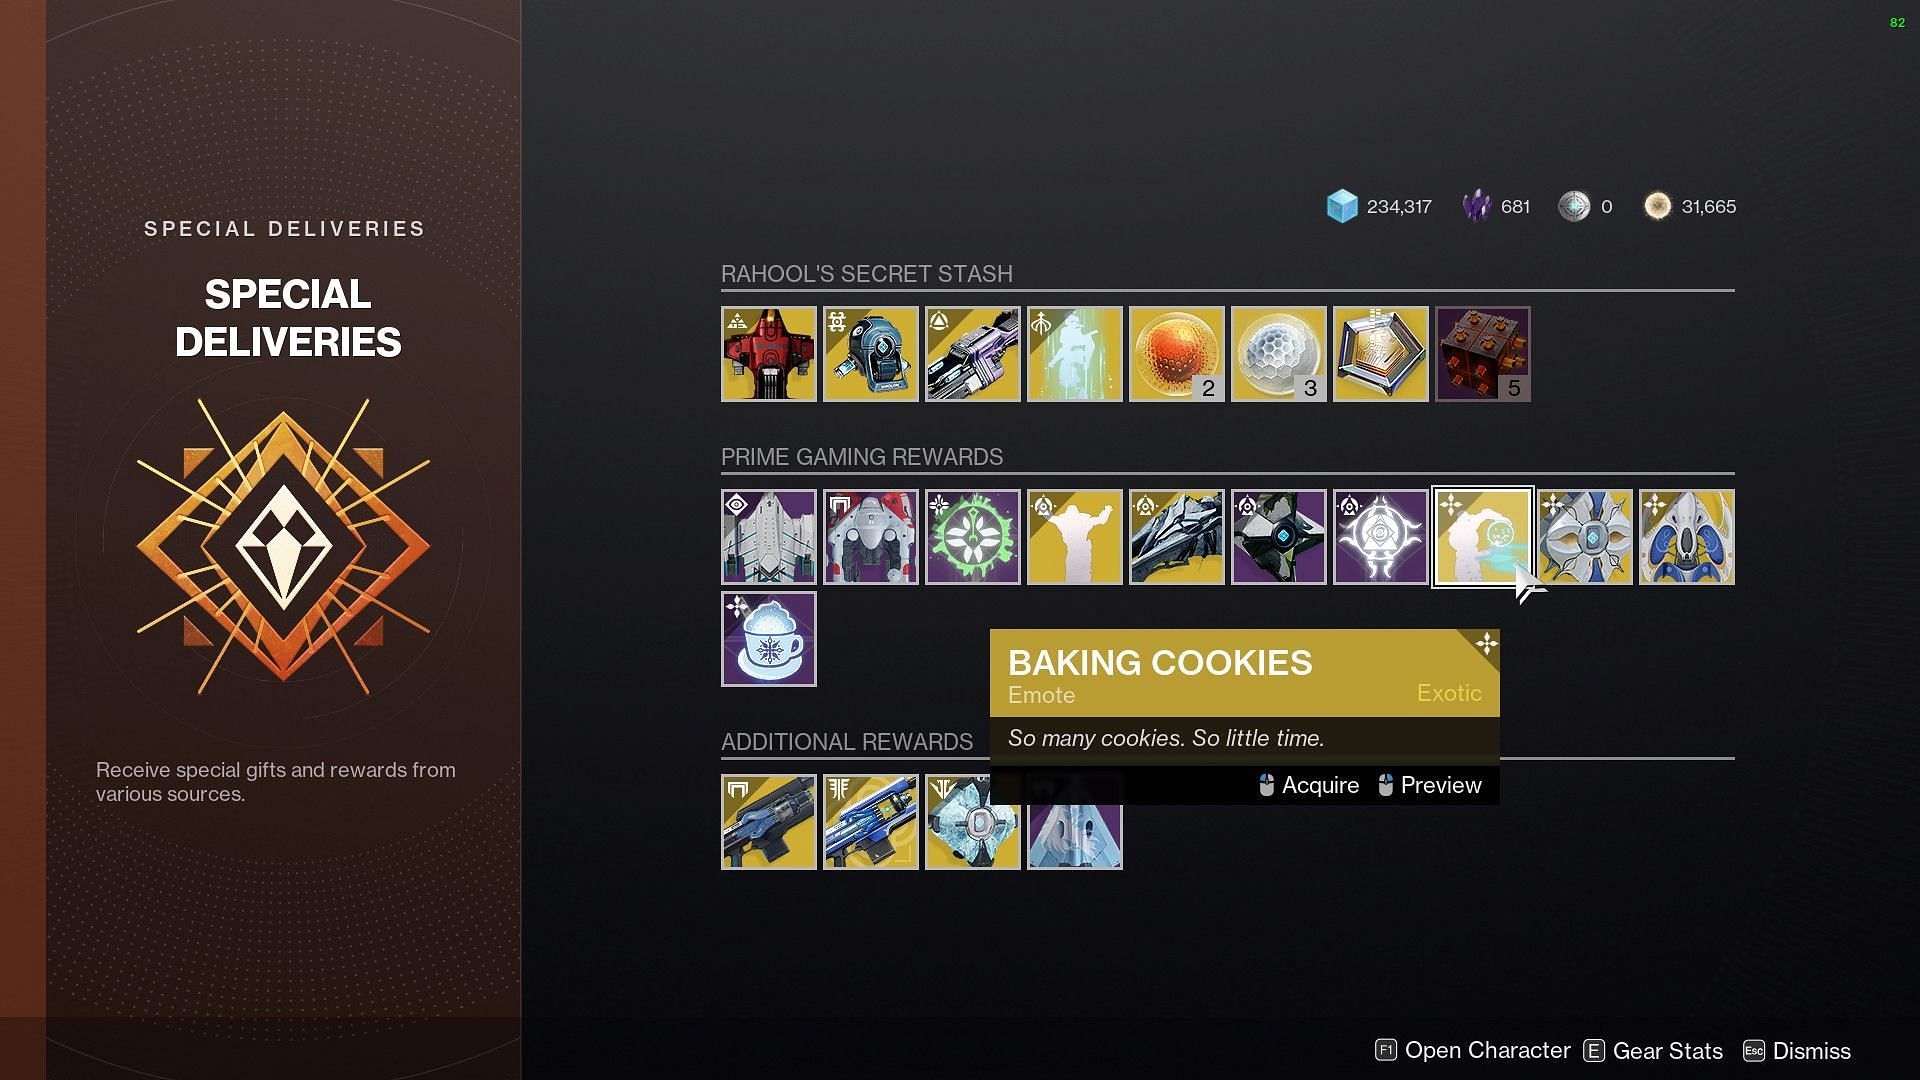 Special Delivery Kiosk page in the Tower (Image via Bungie) 